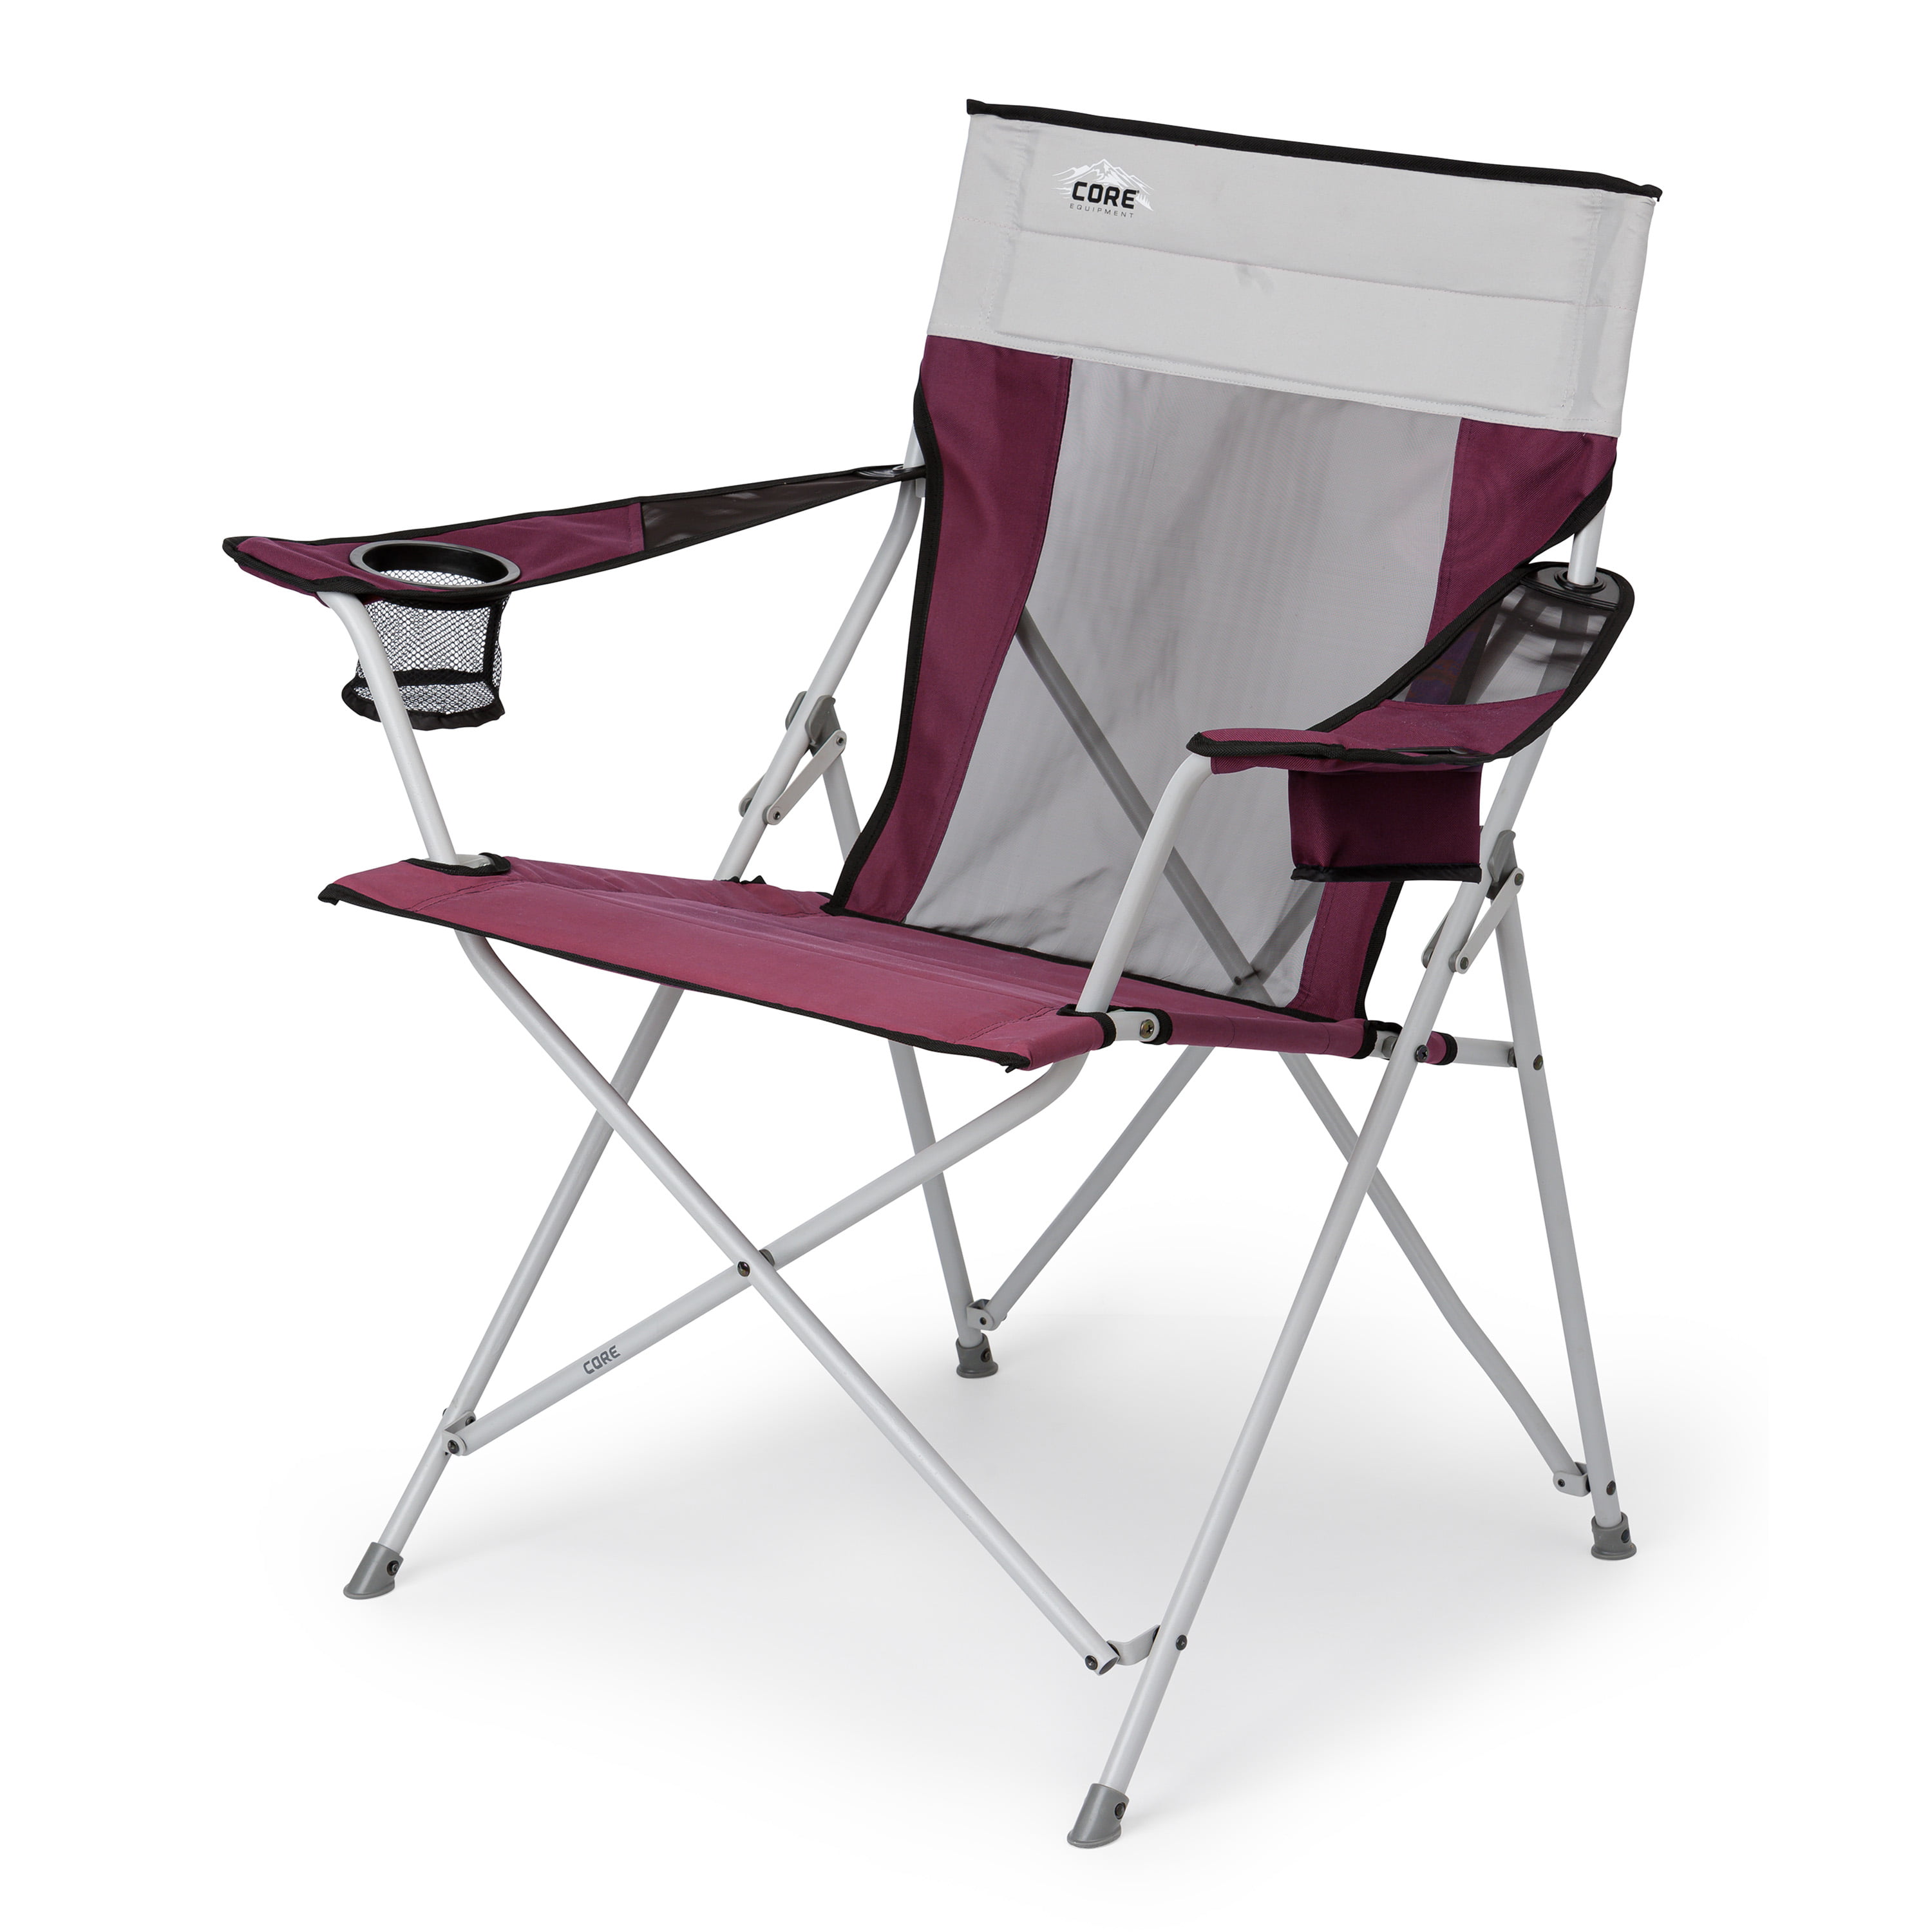 Core Portable Outdoor Camping Folding Chair with Carrying